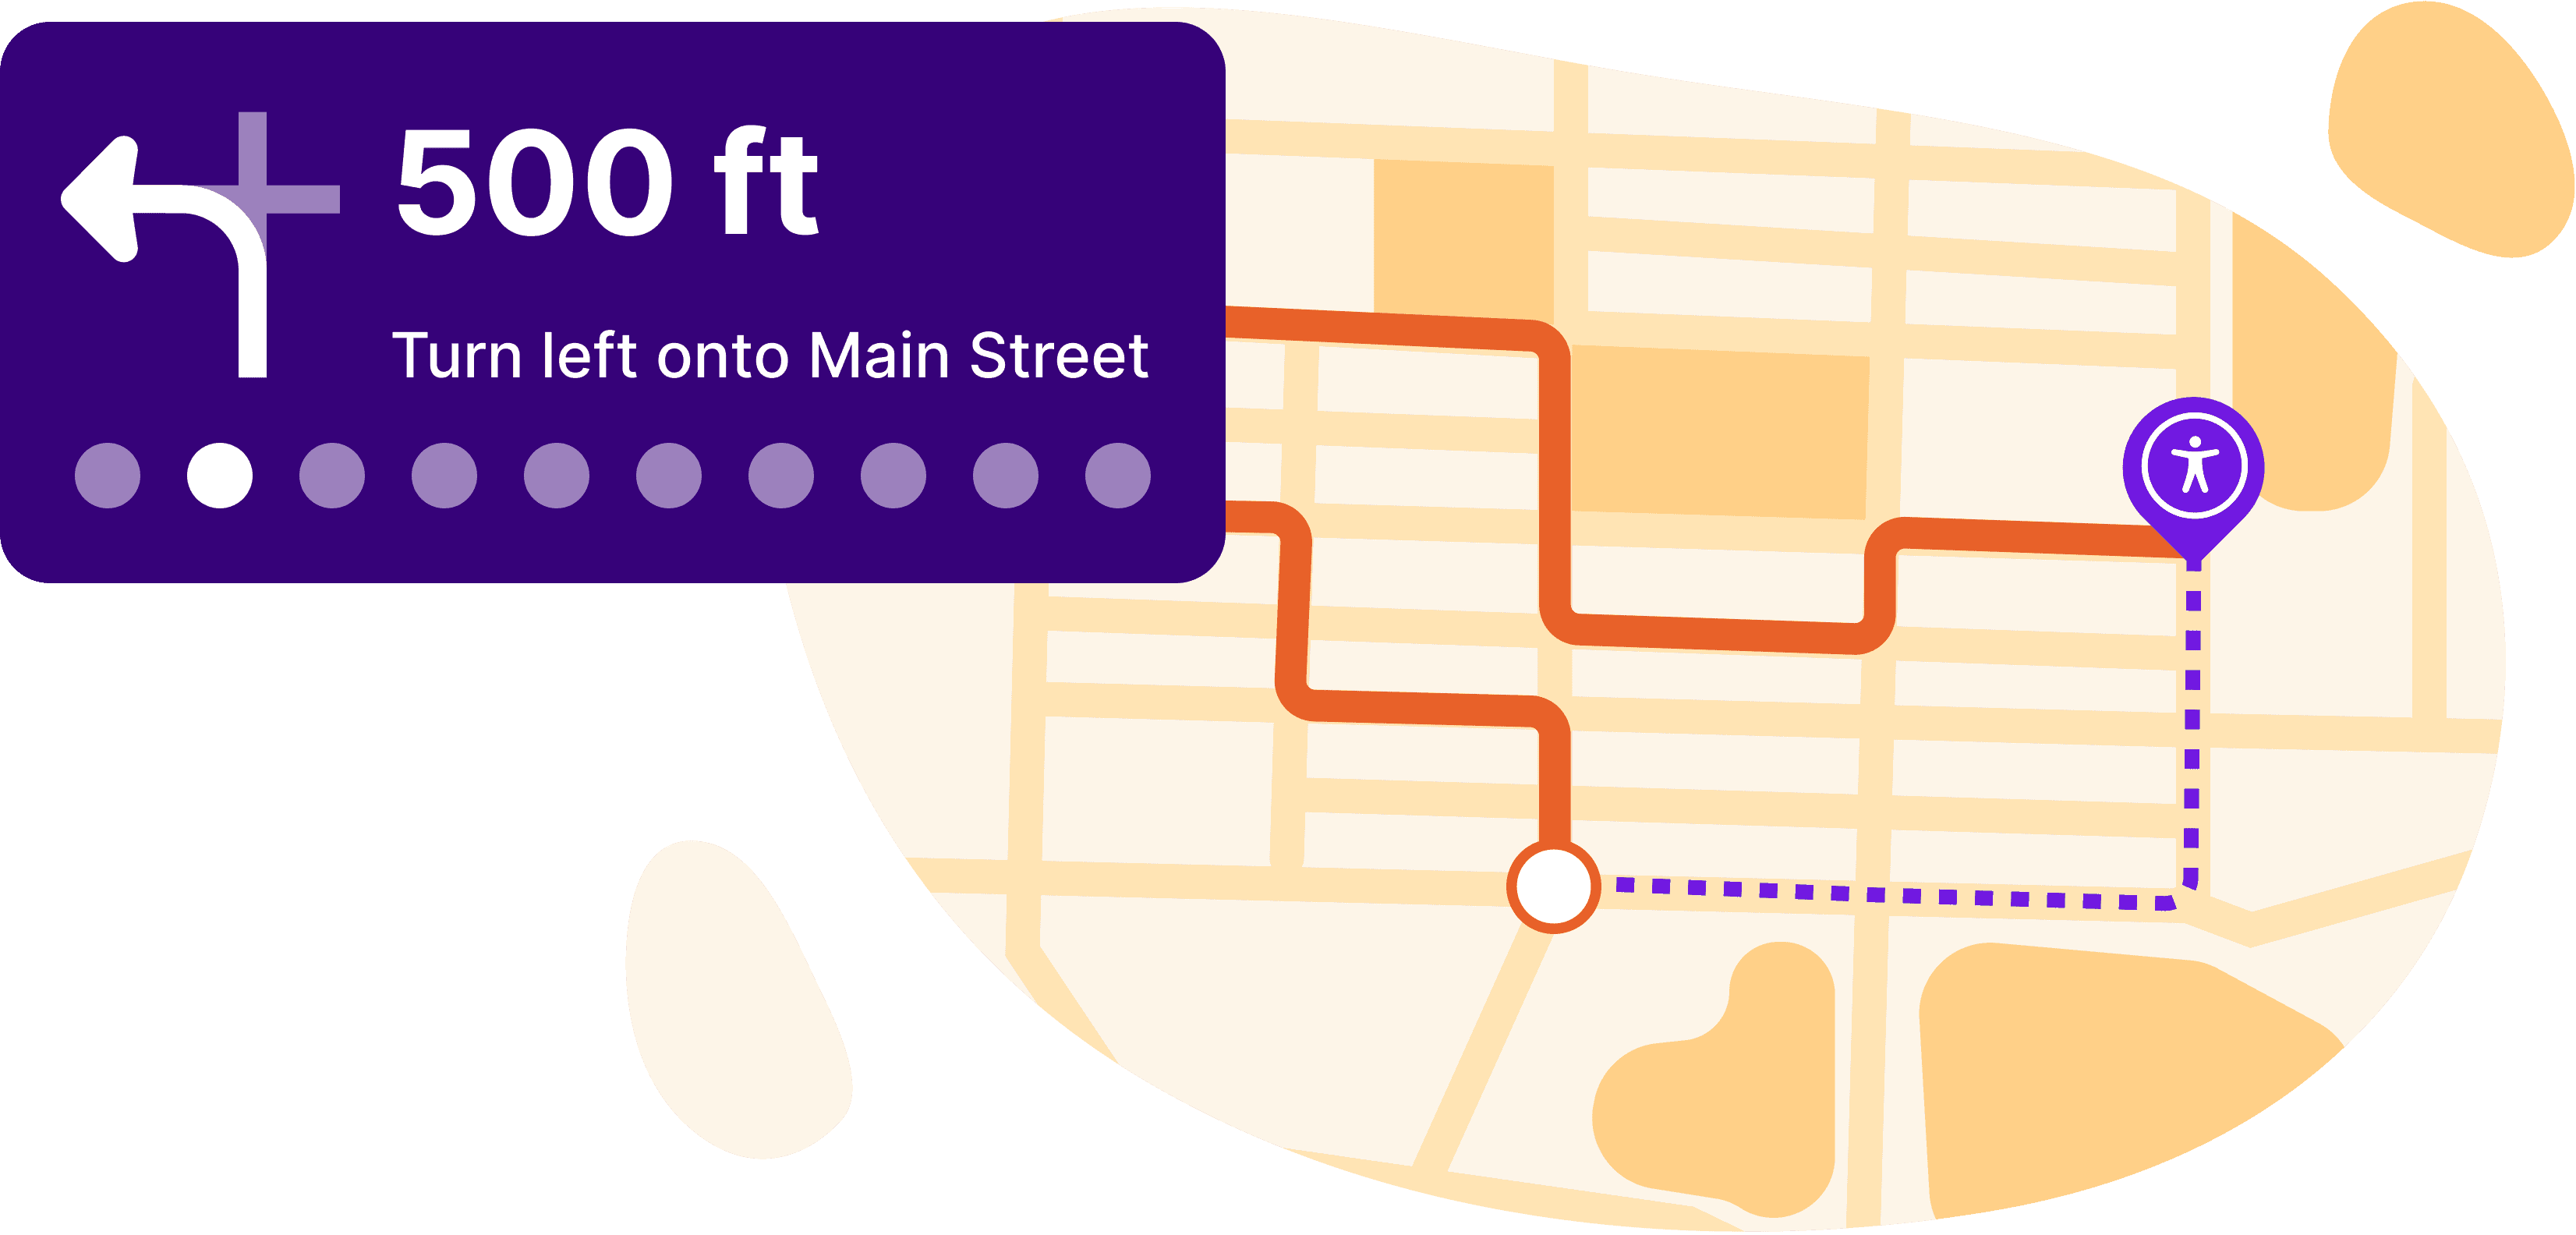 Stylized map with a turn-by-turn directions interface that reads in 500 feet, turn left onto Main street.